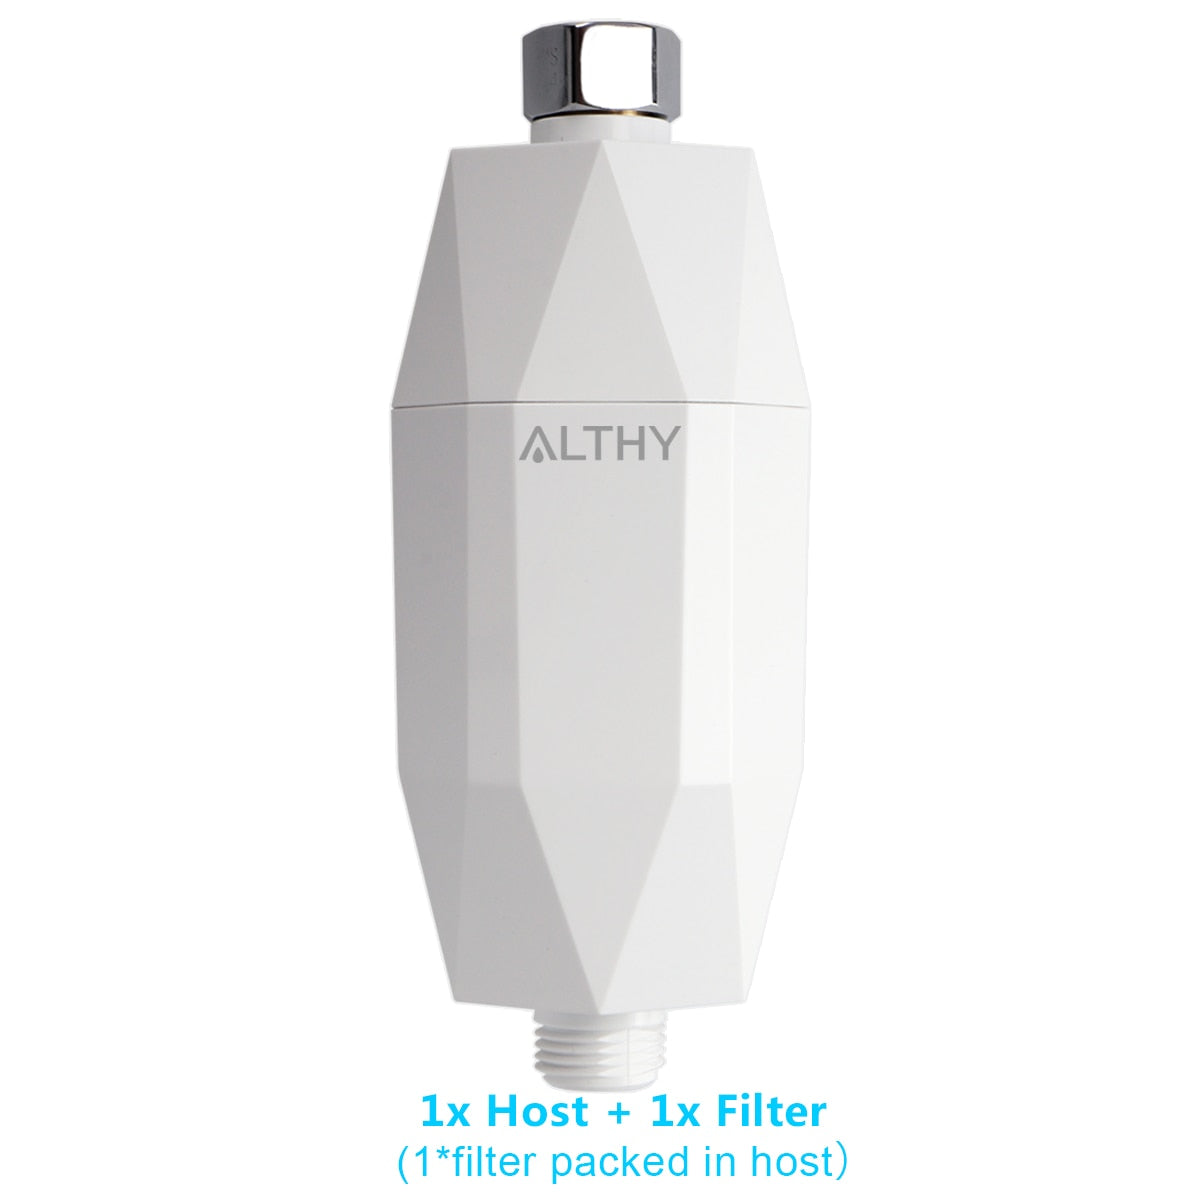 ALTHY Vitamin C Revitalizing Shower Water Filter - Reduces Chlorine Heavy Metal - Improves Dry Itchy Skin, Hair Dandruff, Eczema